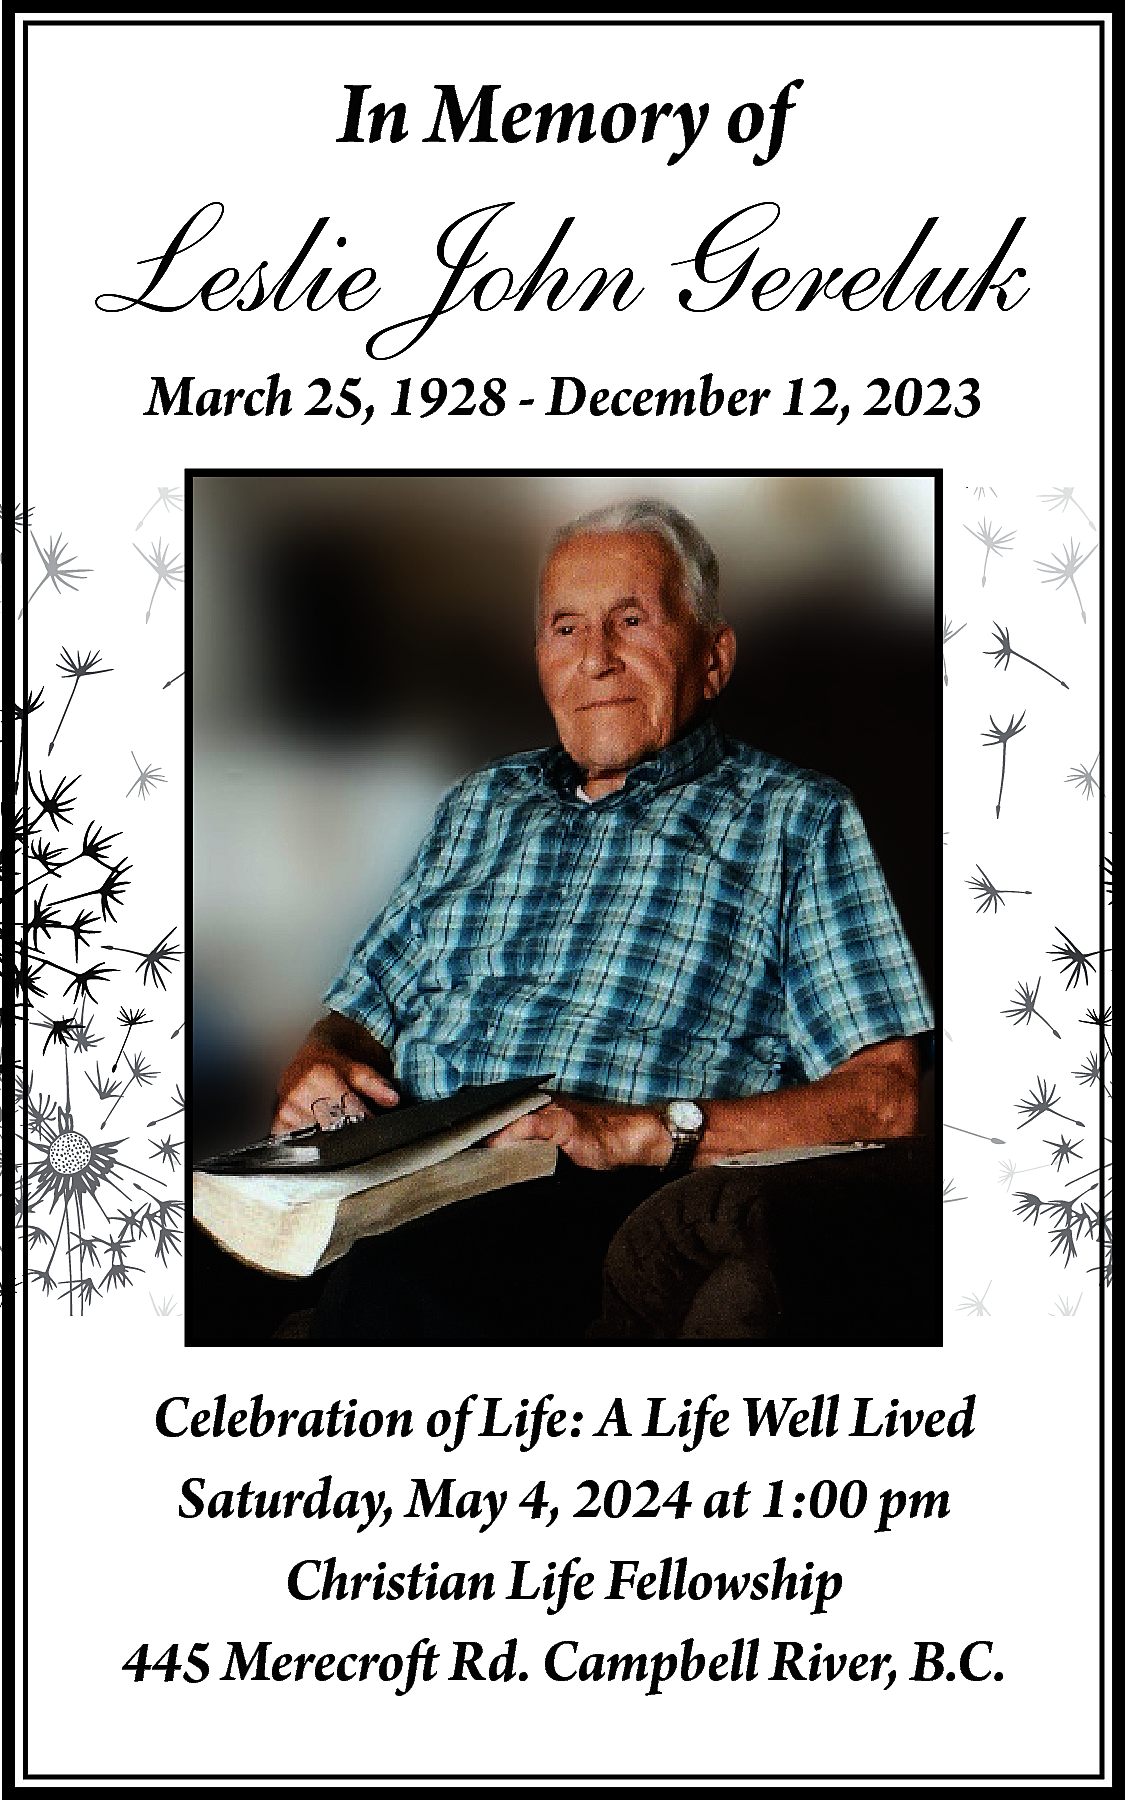 In Memory of <br> <br>Leslie  In Memory of    Leslie John Gereluk  March 25, 1928 - December 12, 2023    Celebration of Life: A Life Well Lived  Saturday, May 4, 2024 at 1:00 pm  Christian Life Fellowship  445 Merecroft Rd. Campbell River, B.C.    